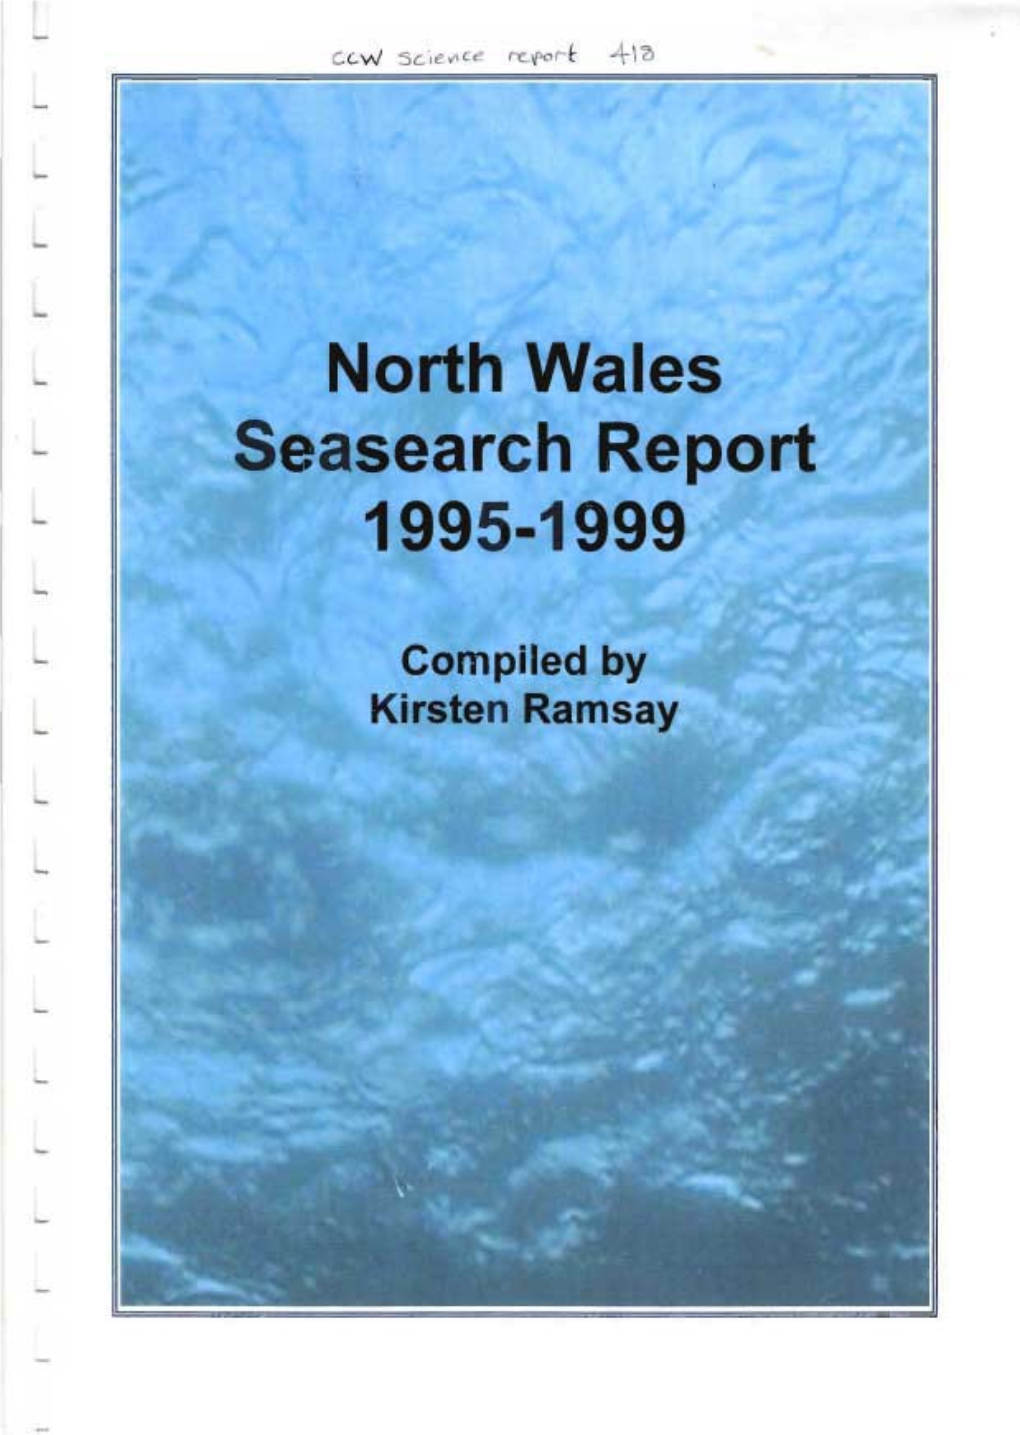 North Wales Seasearch Report 1995-1999